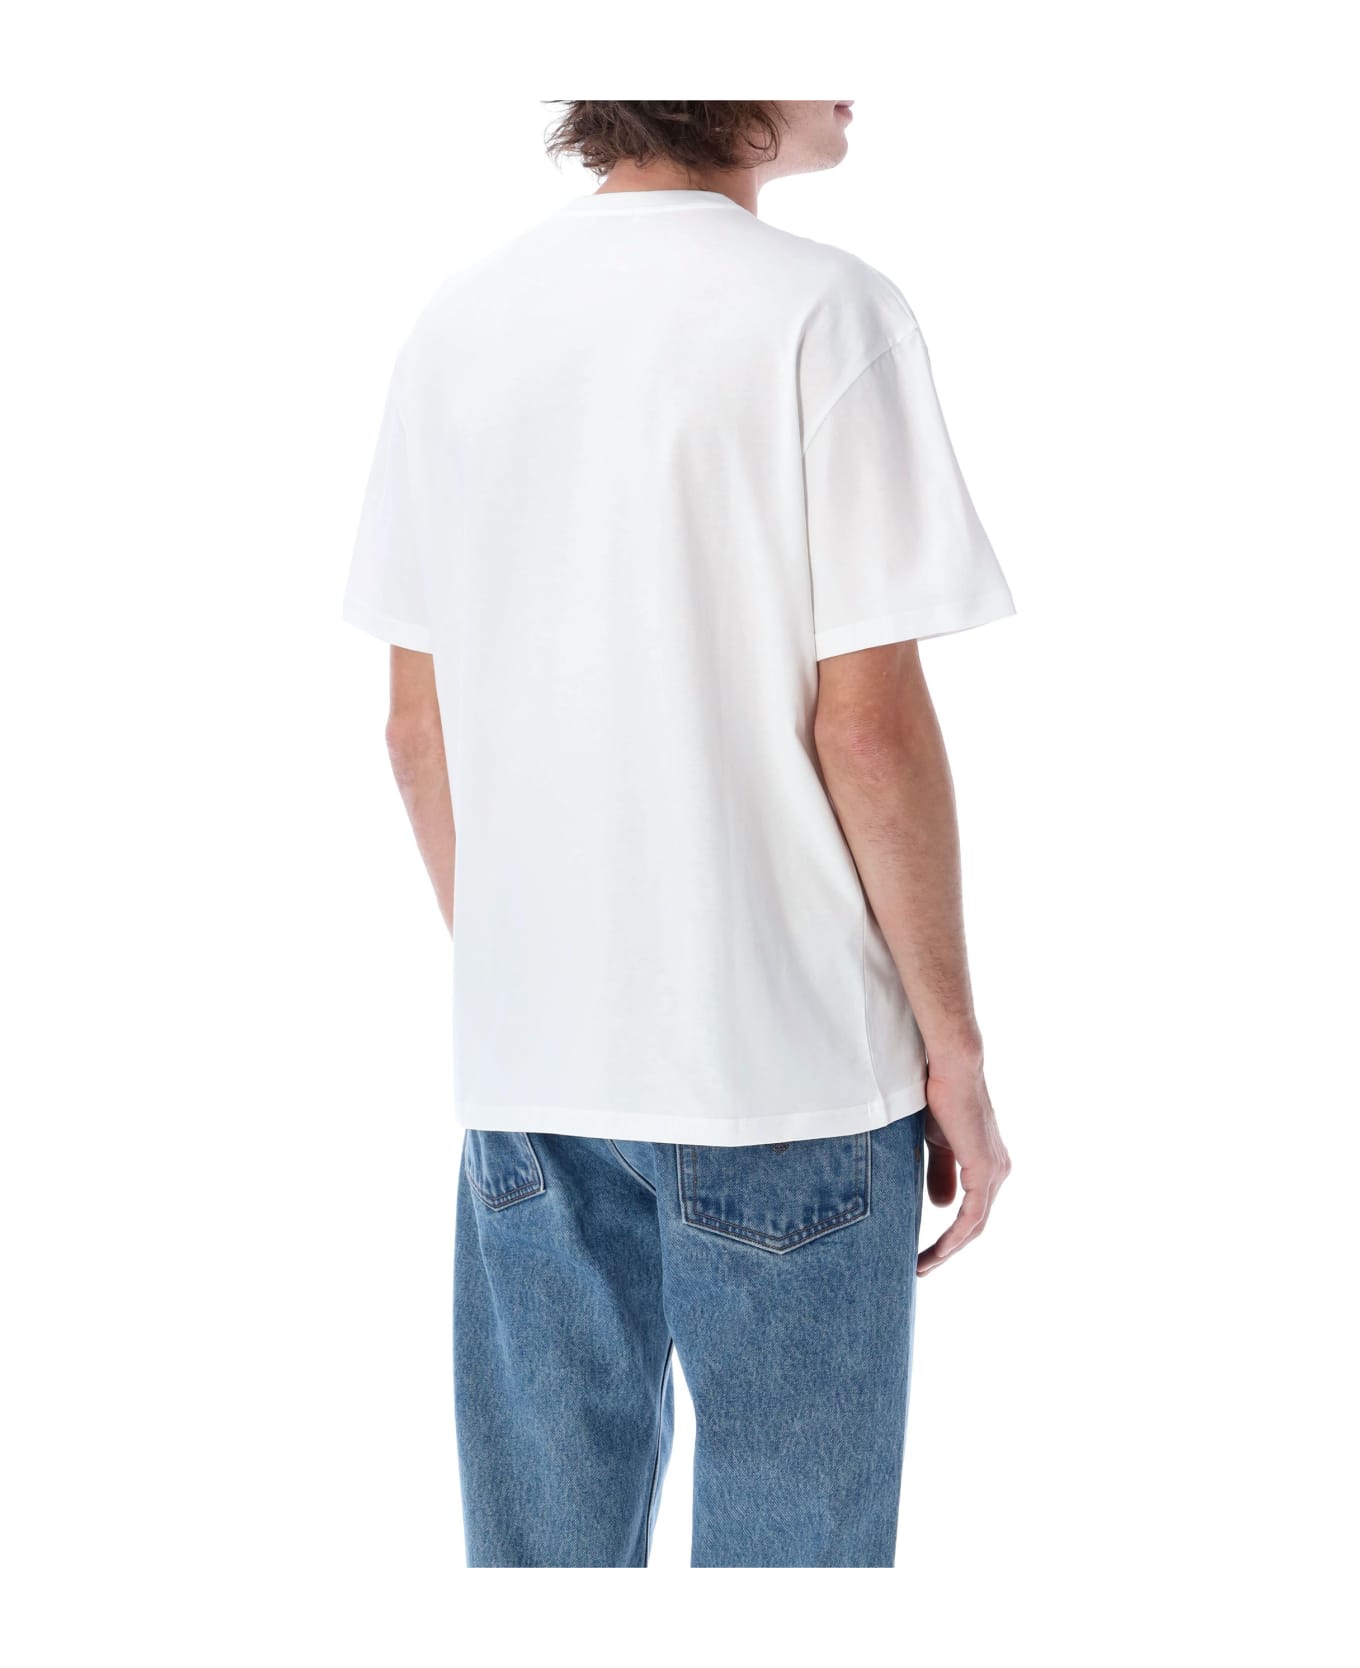 J.W. Anderson Anchor Patch T-shirt - WHITE シャツ